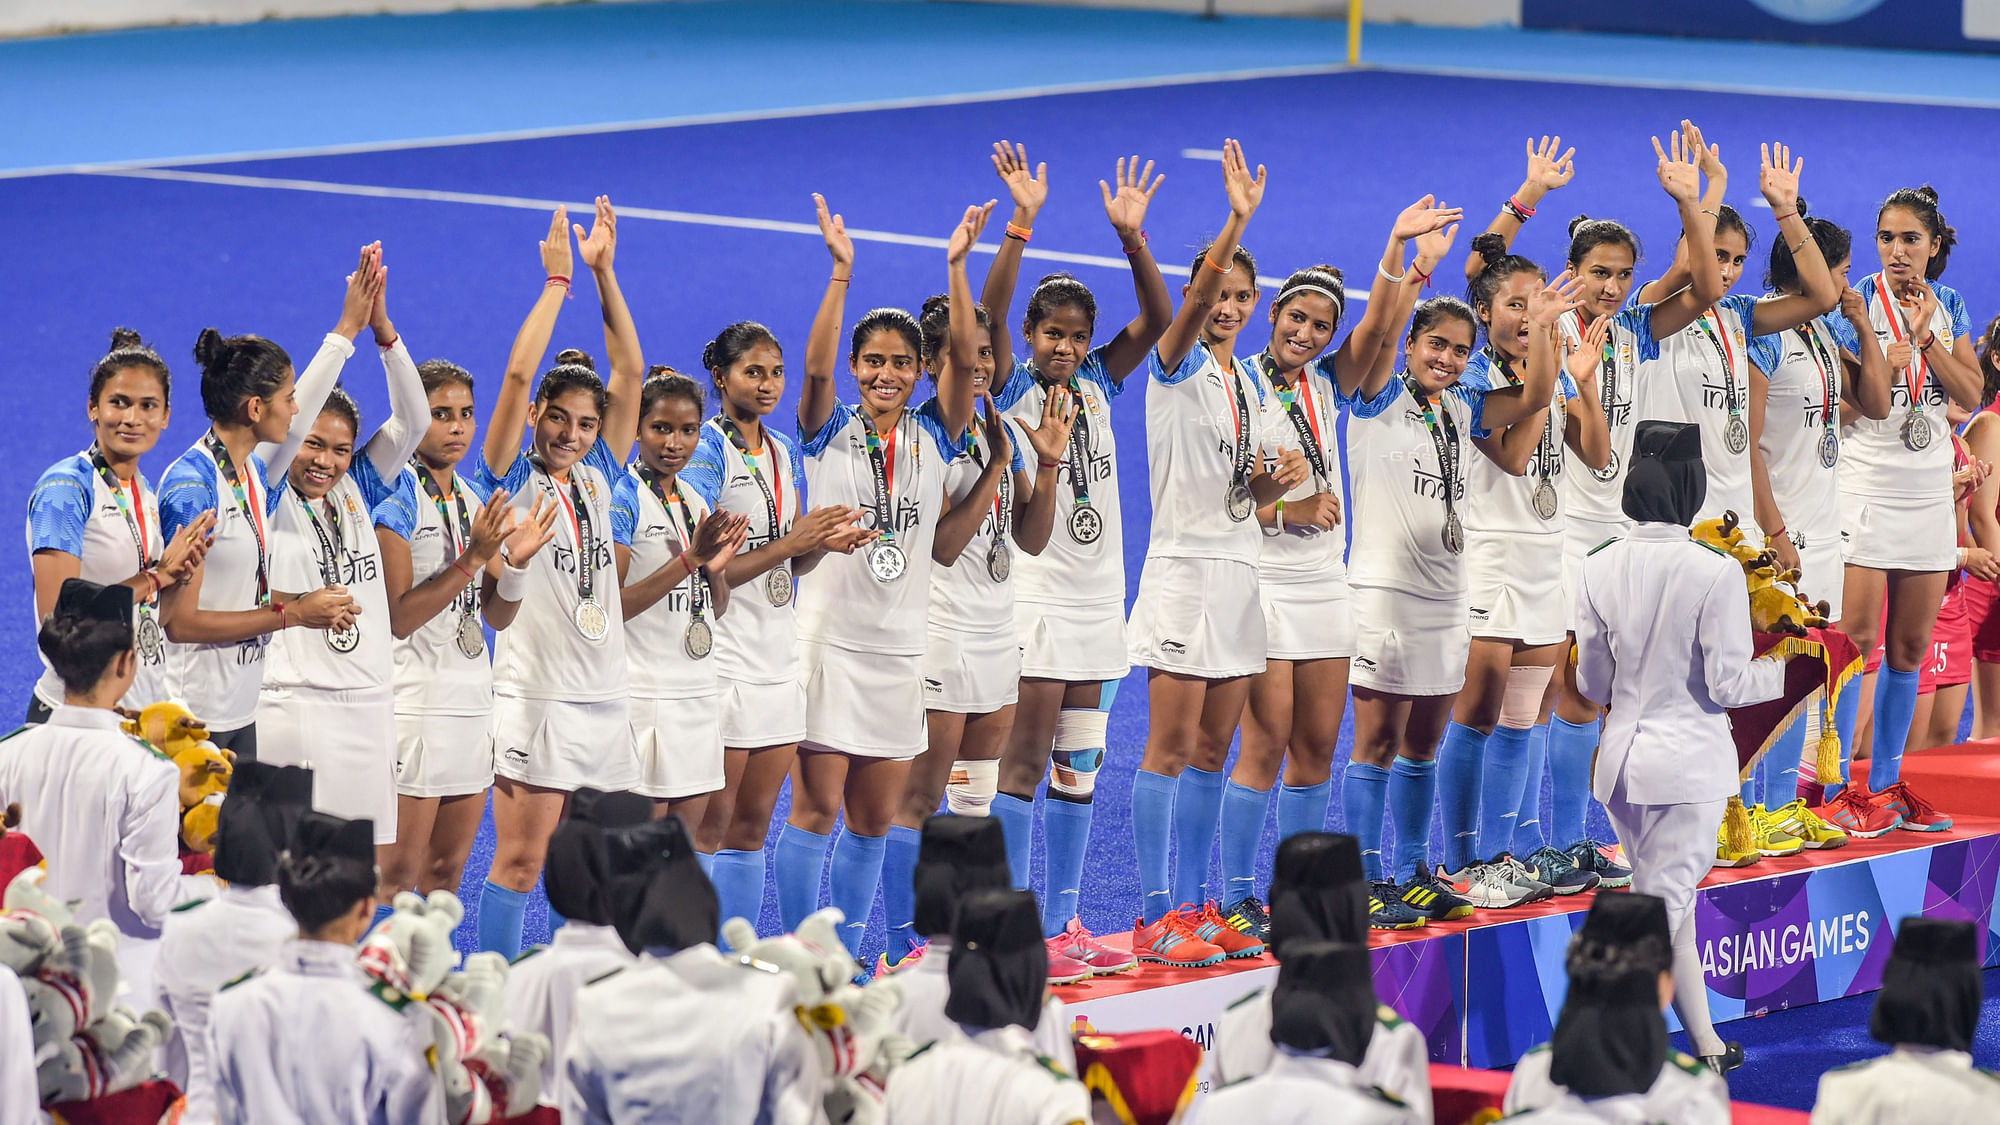 The Indian women’s hockey team settled for silver after losing to Japan in the final.